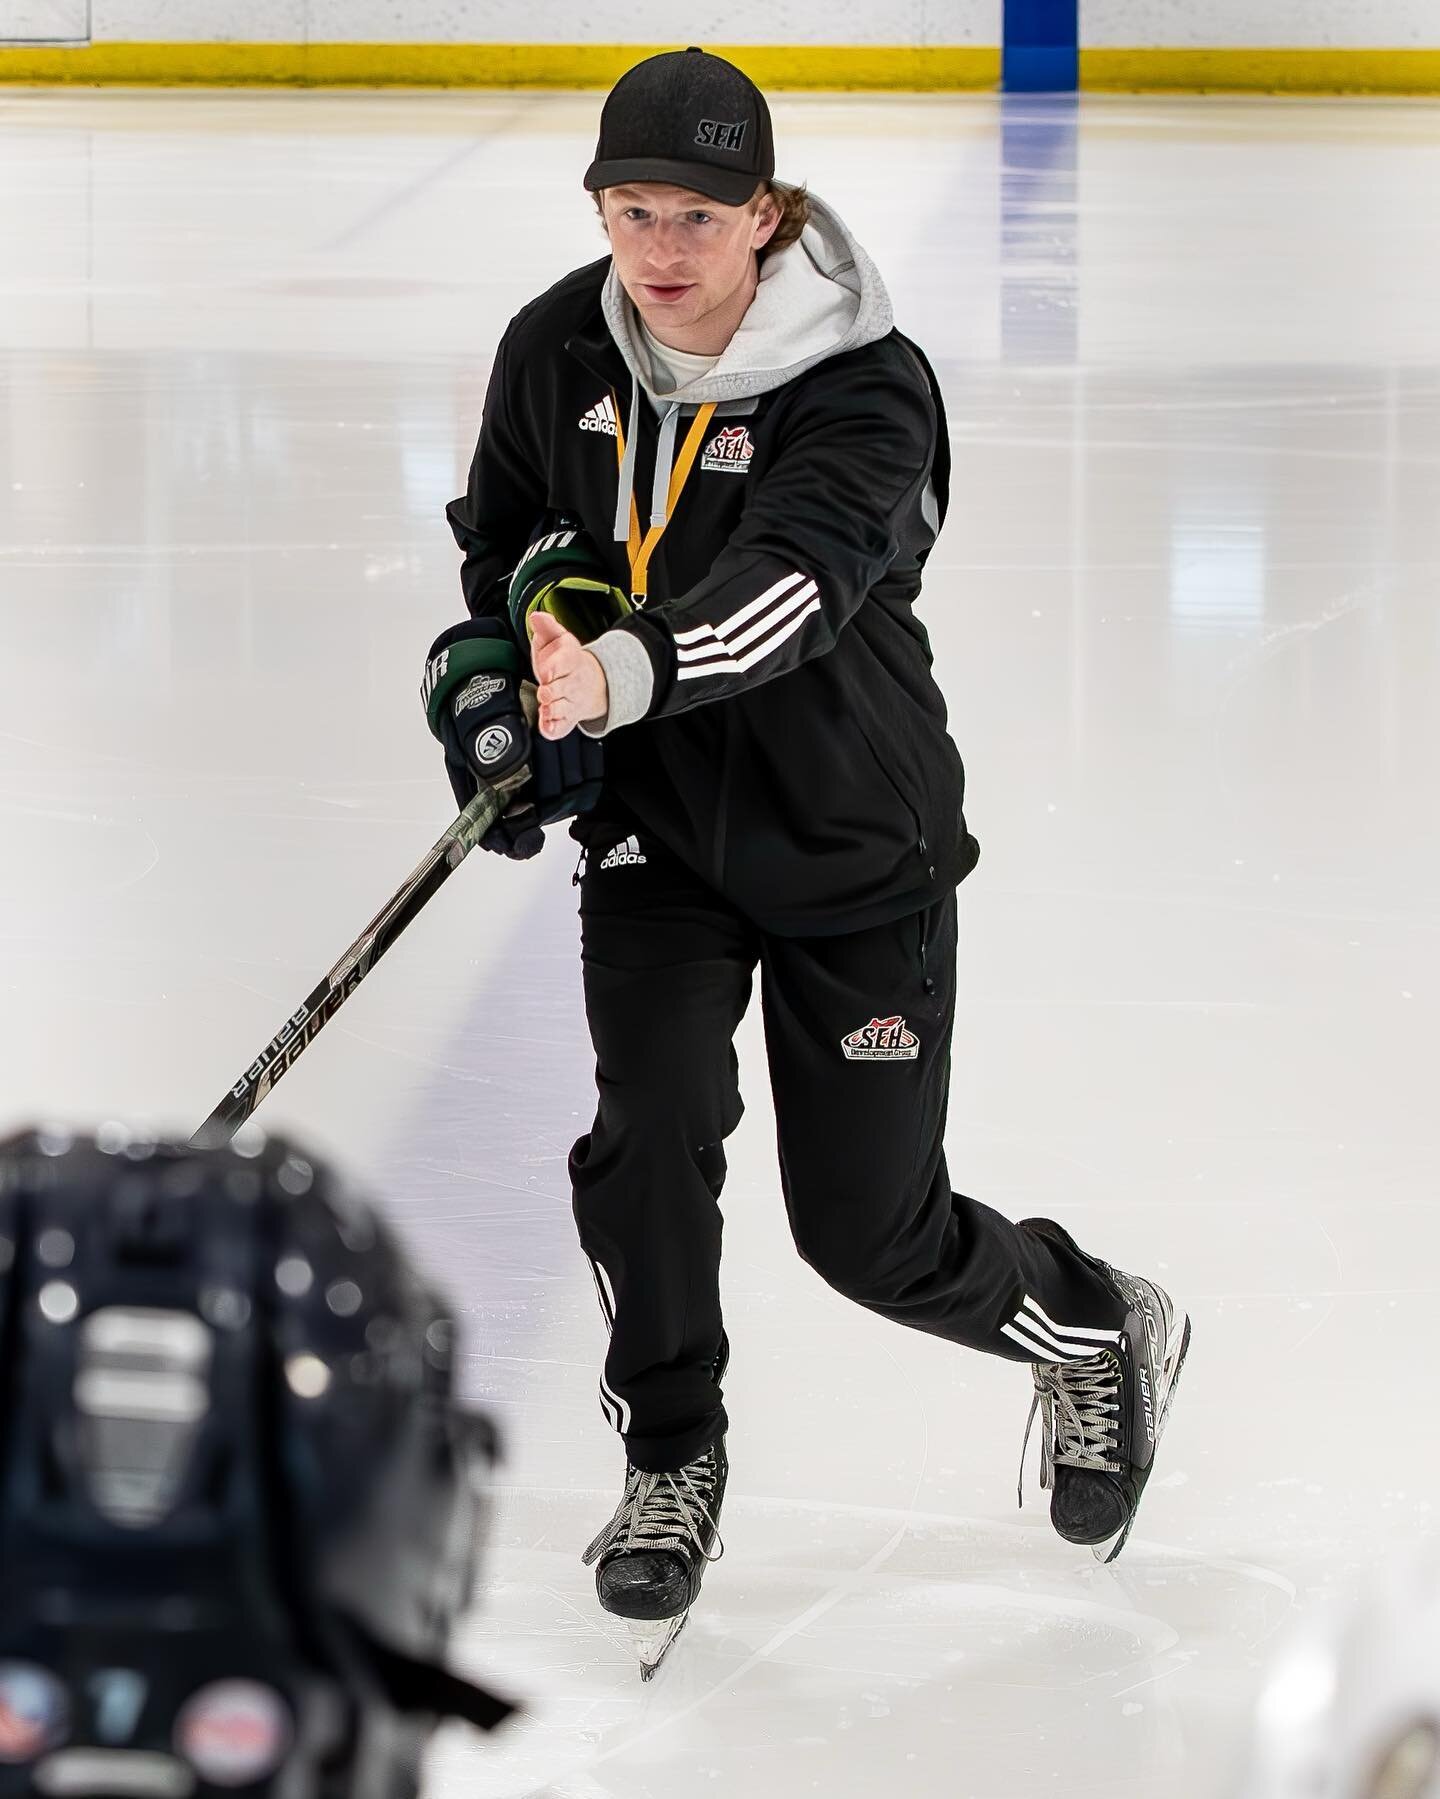 DETAILS: Coach Sharp coaching up the details in edge control and the importance of single leg stability.

Are you focusing on the details? 

Train with us in 2024. Click the link in bio to learn more. #development #hockey #skills #developnowadvancela